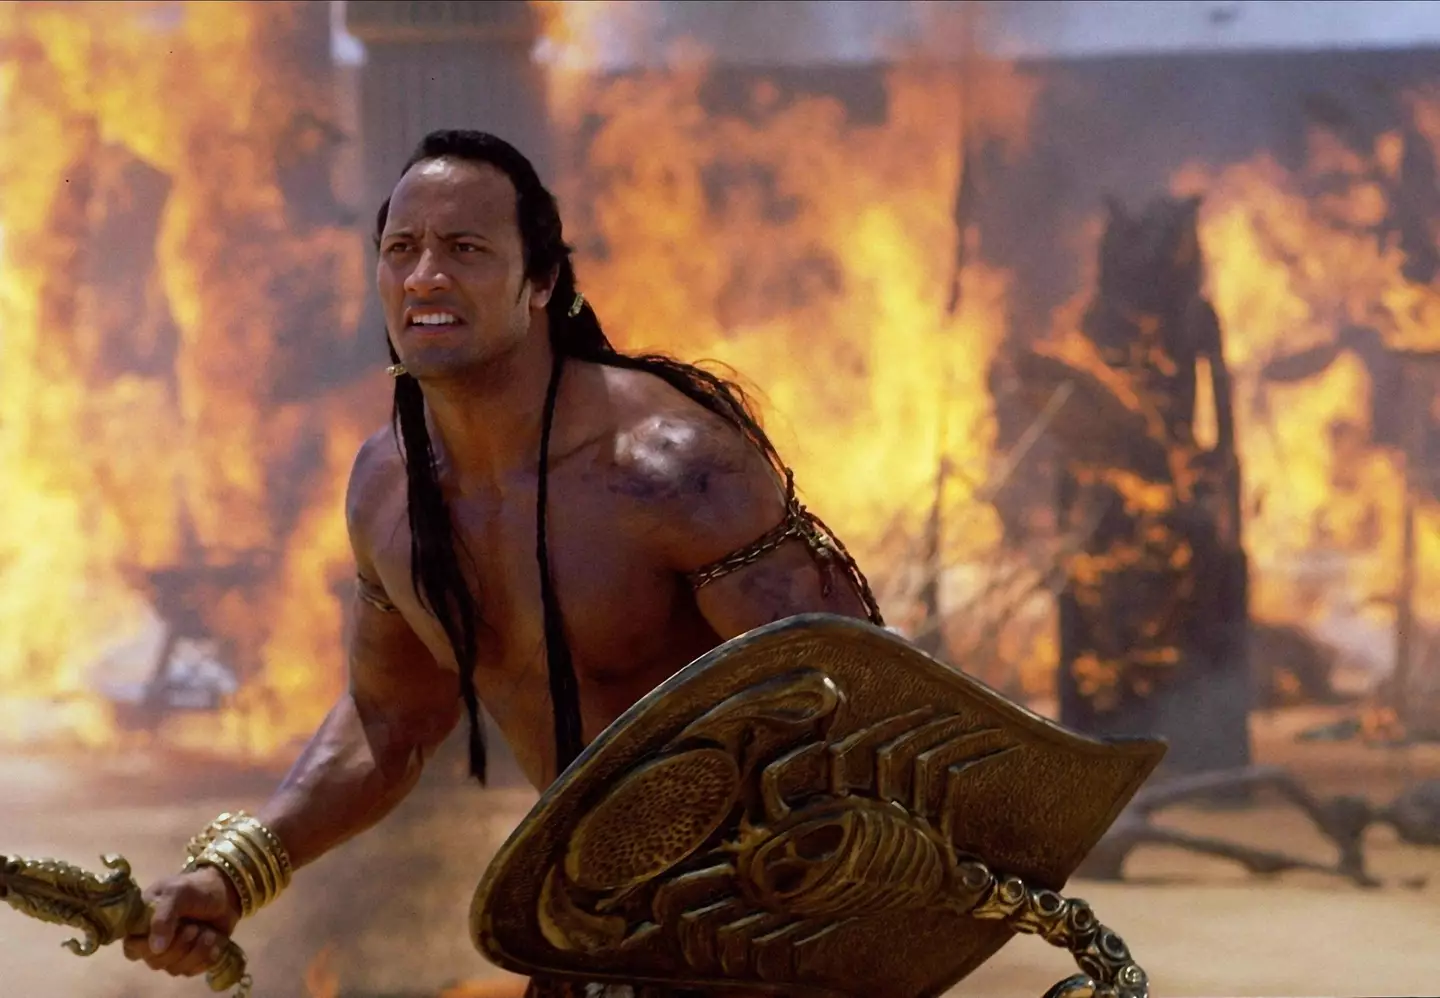 Dwayne Johnson made his Hollywood debut in The Mummy Returns as the villainous Scorpion King.